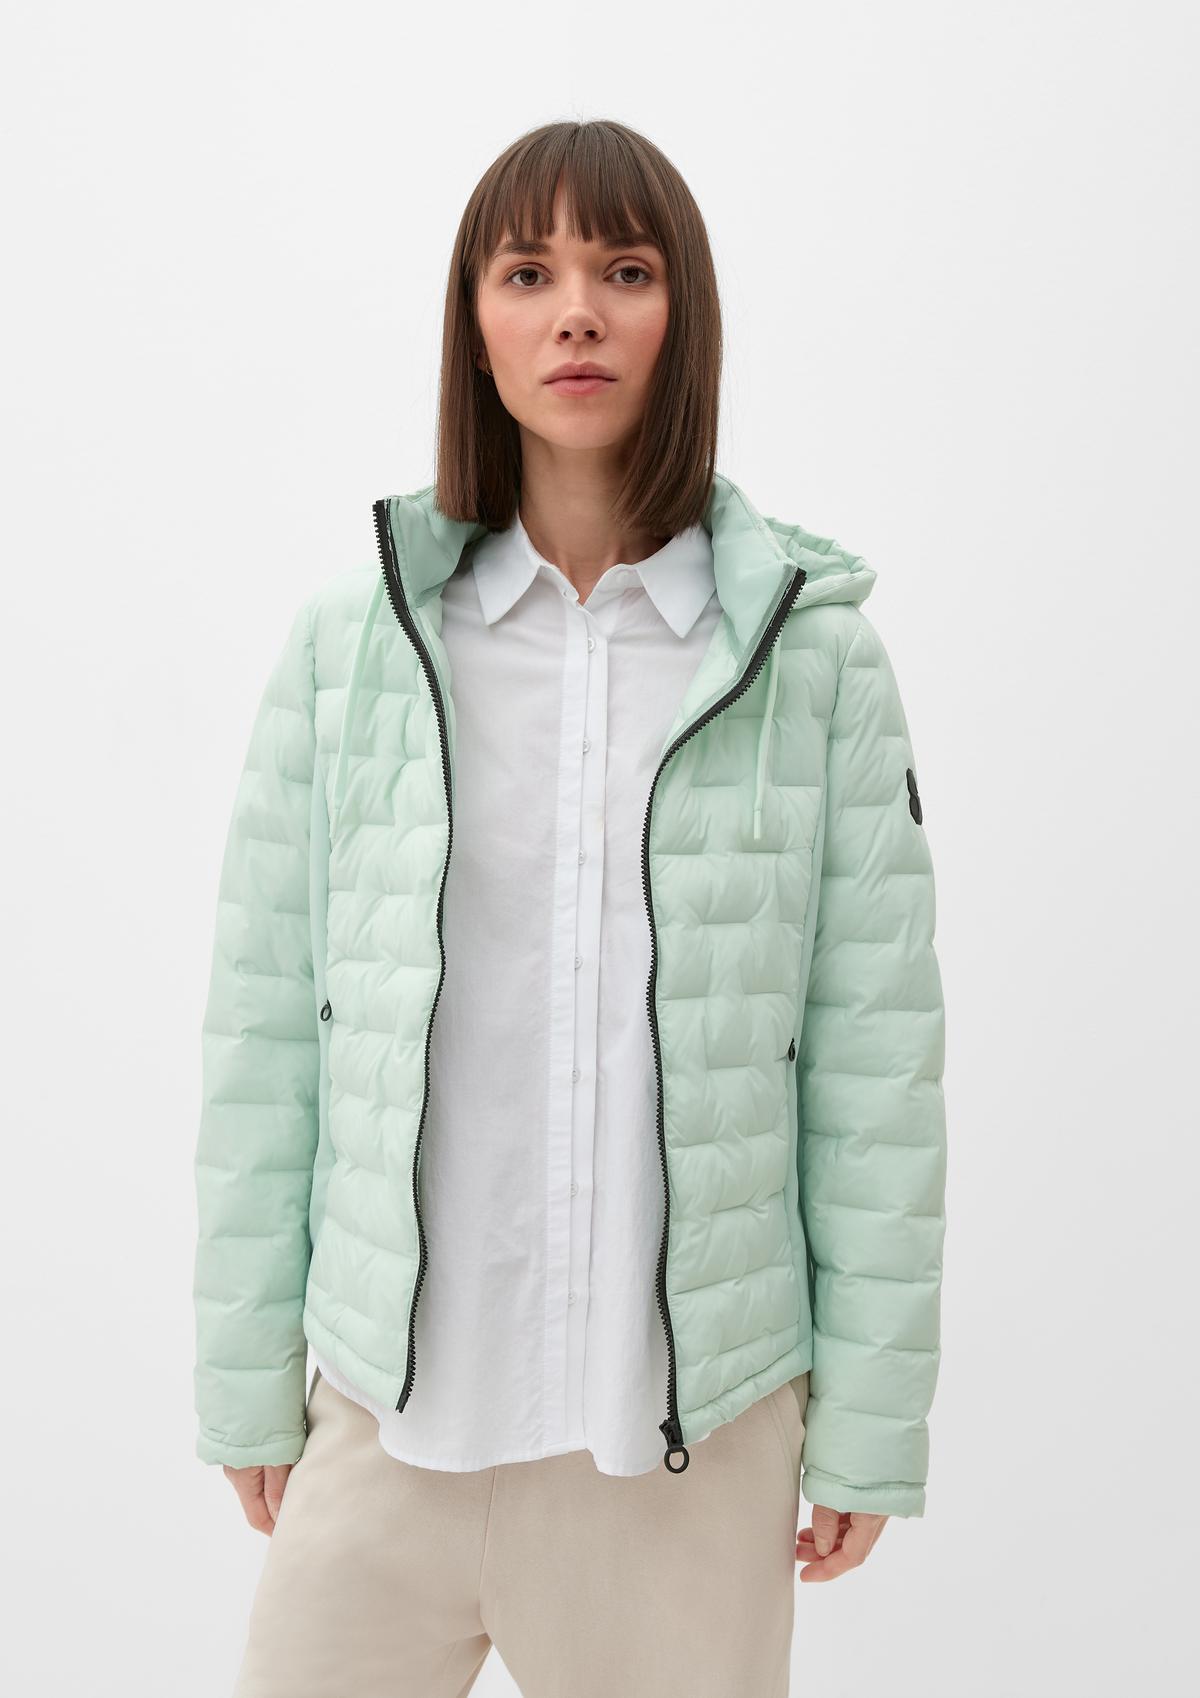 in mix offwhite - outdoor materials Padded of jacket a